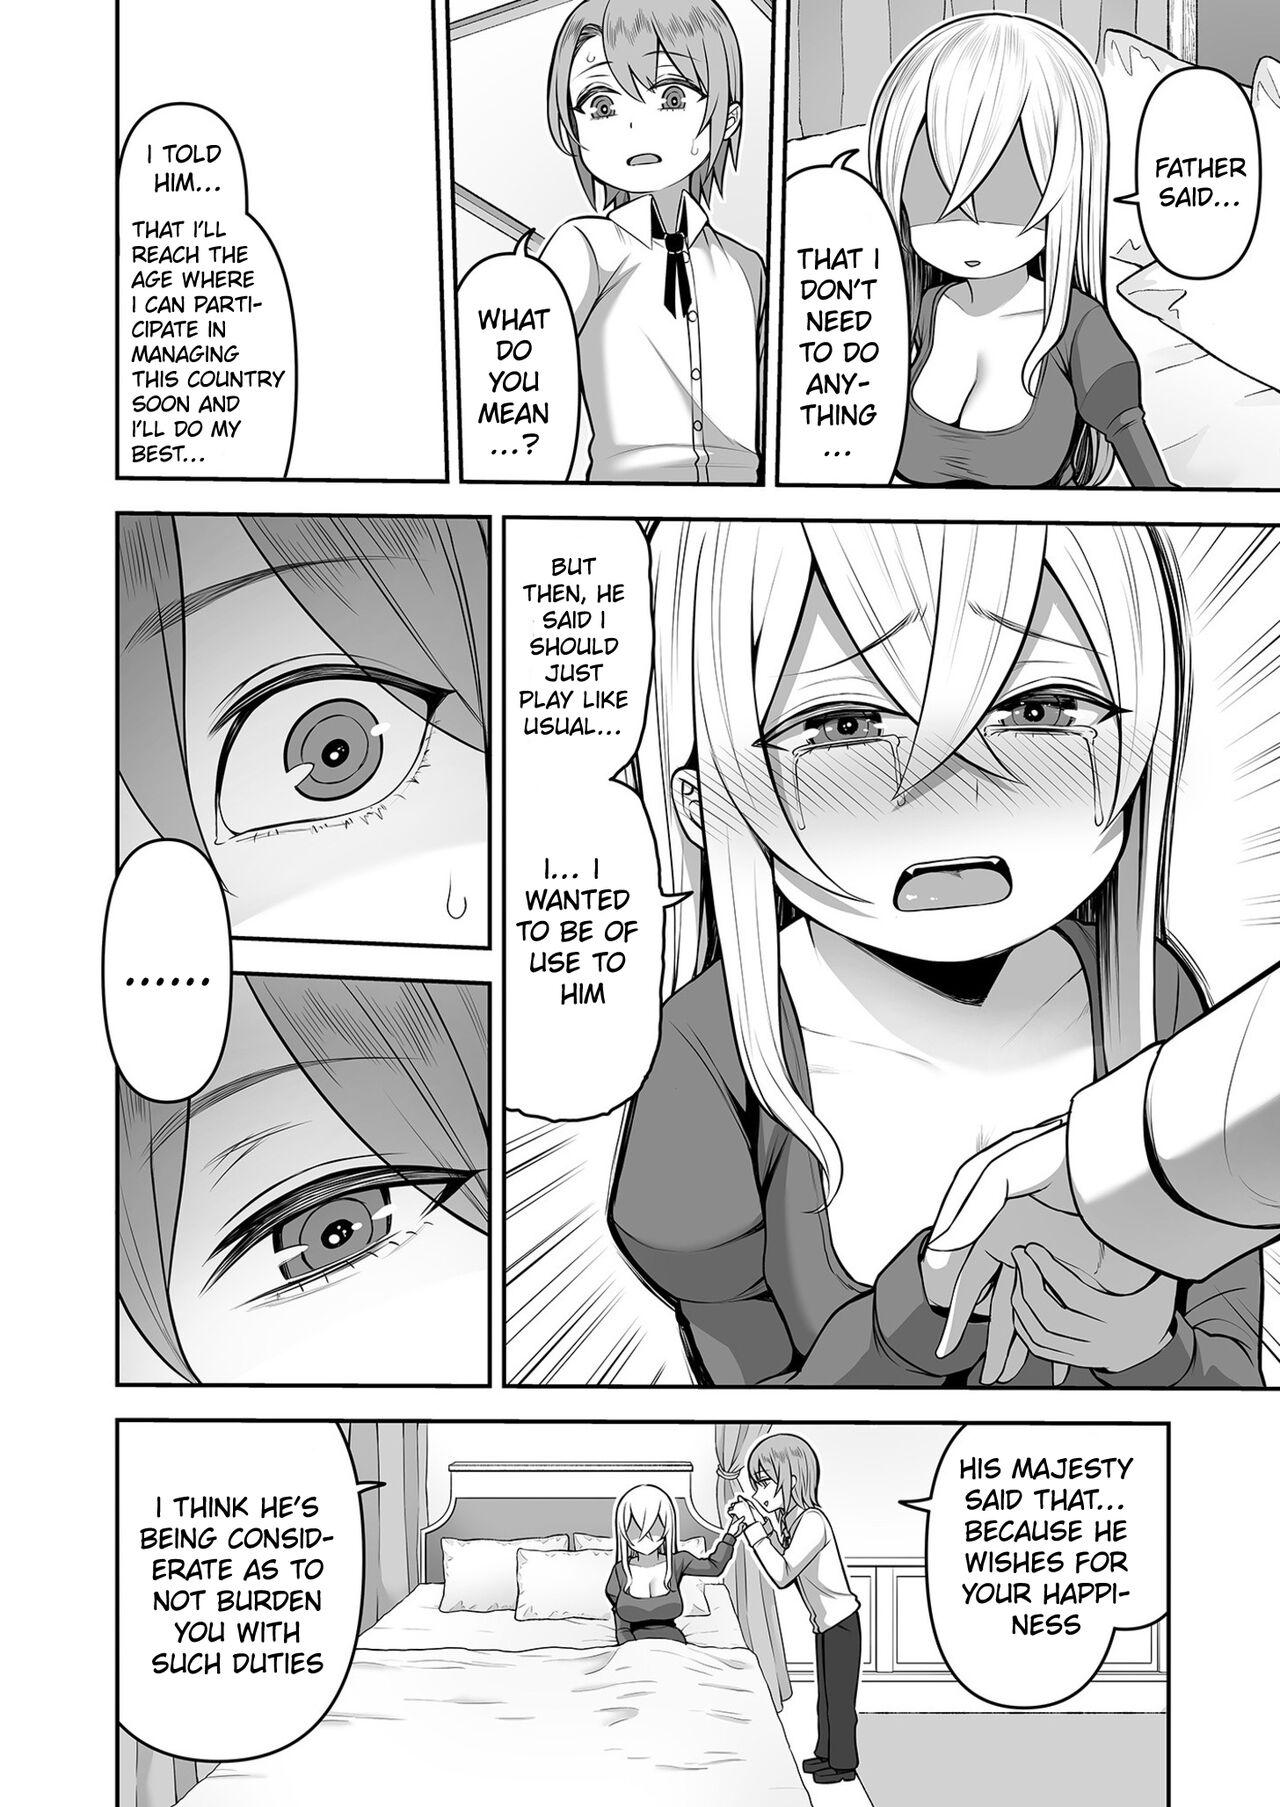 Gay Orgy [Kayumidome] Valerie Monogatari ~Oujo-sama wa Yaritai Houdai!?~ Ch1/ The Story of Valerie ~The Queen Gets To Fuck As Much As She Wants!~ Ch.1 [English] {Doujins.com} Stepsister - Page 8